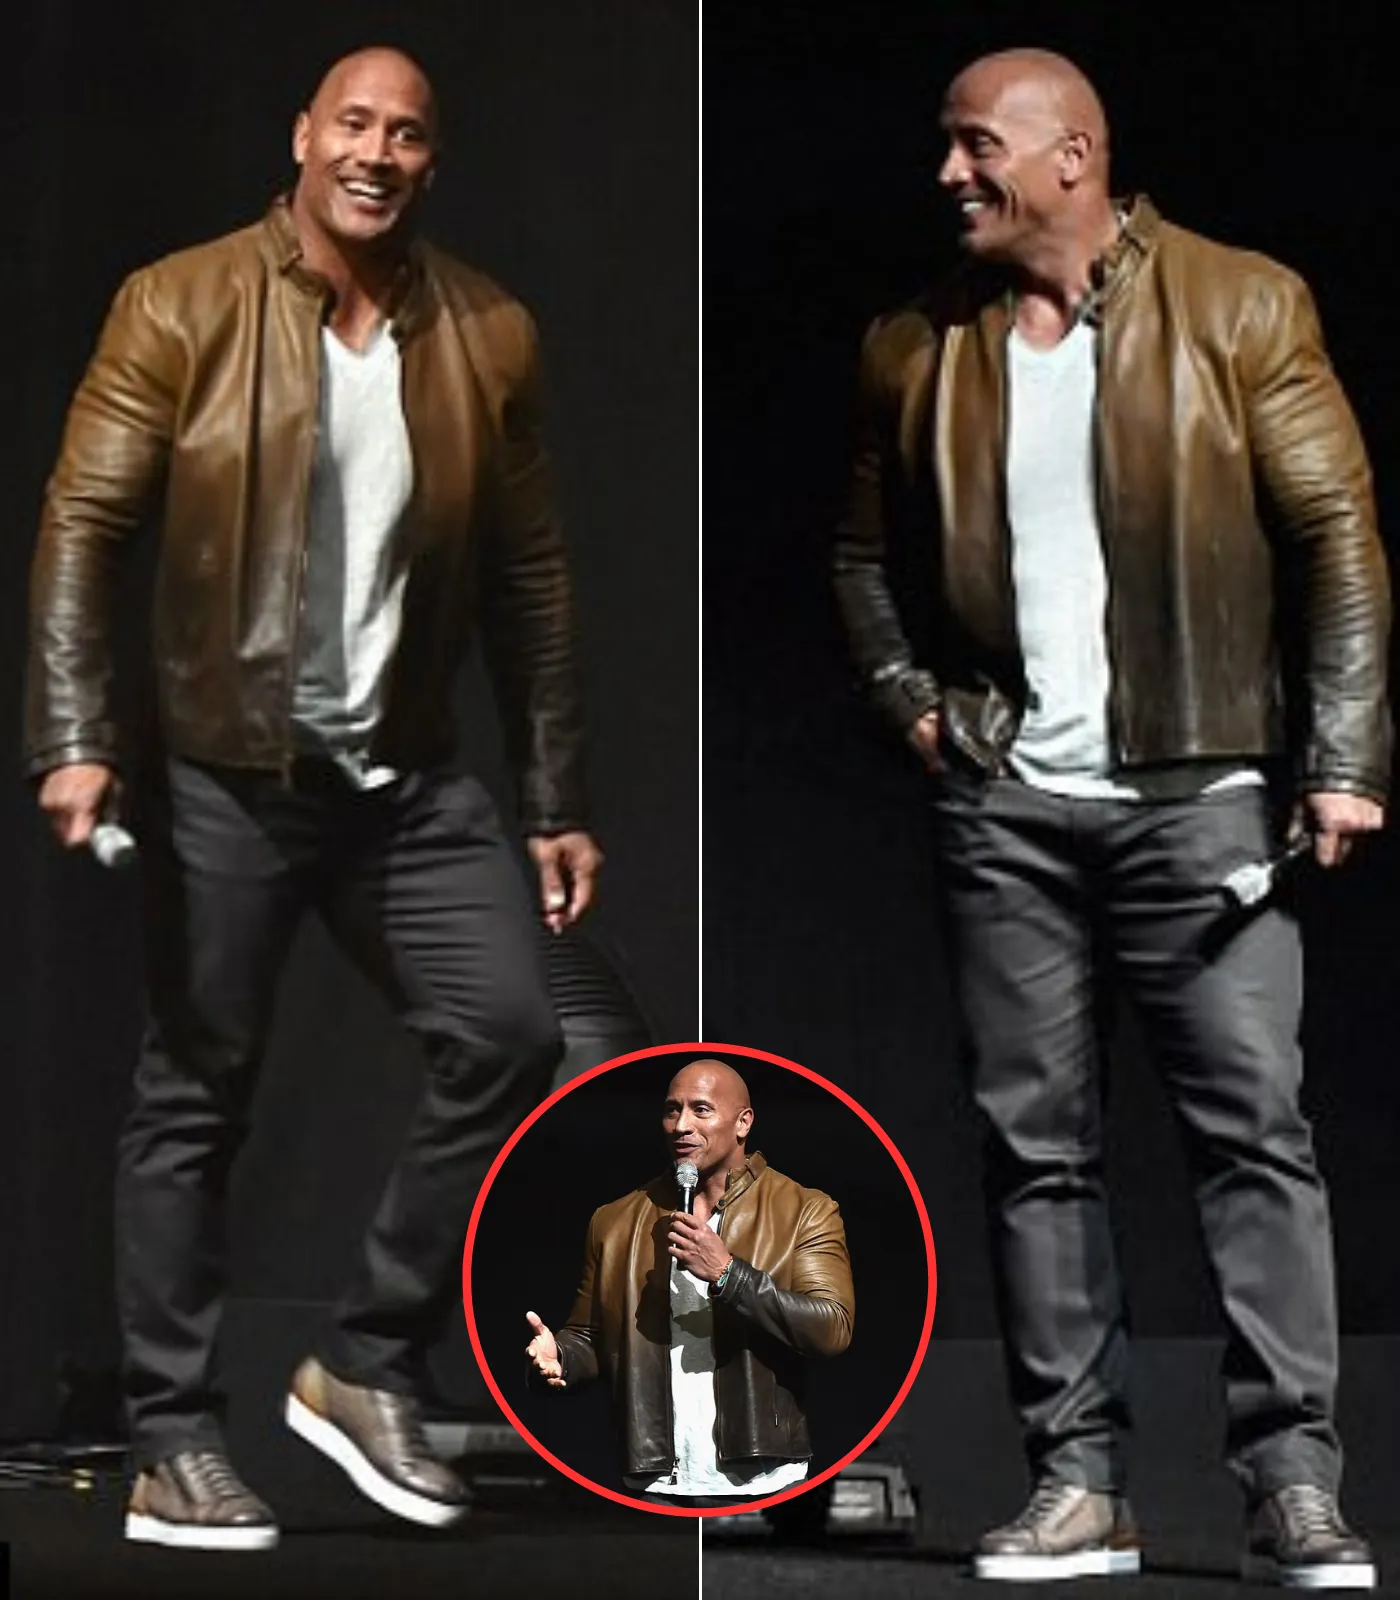 Dwayne 'The Rock' Johnson shows off his huge biceps in leather jacket as he promotes Jumanji reboot